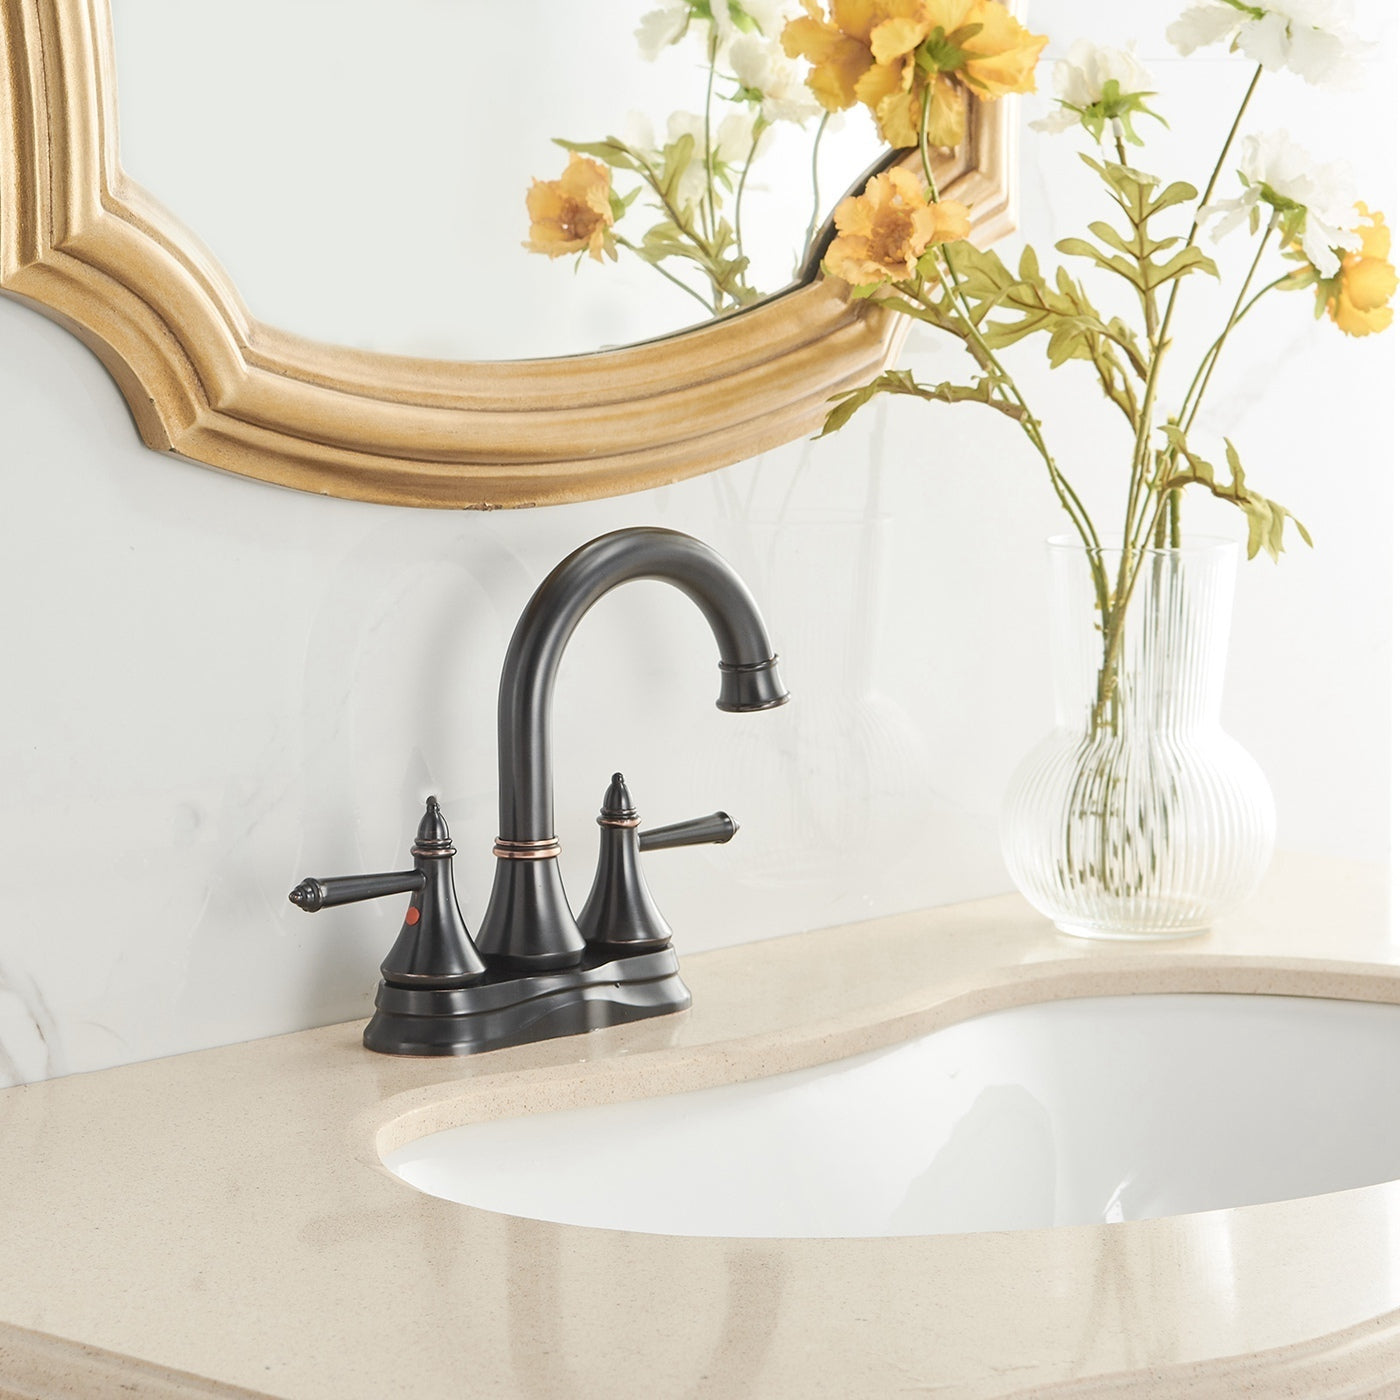 Oil Rubbed Bronze 4 in. Centerset Bathroom Faucet with 2 Handles